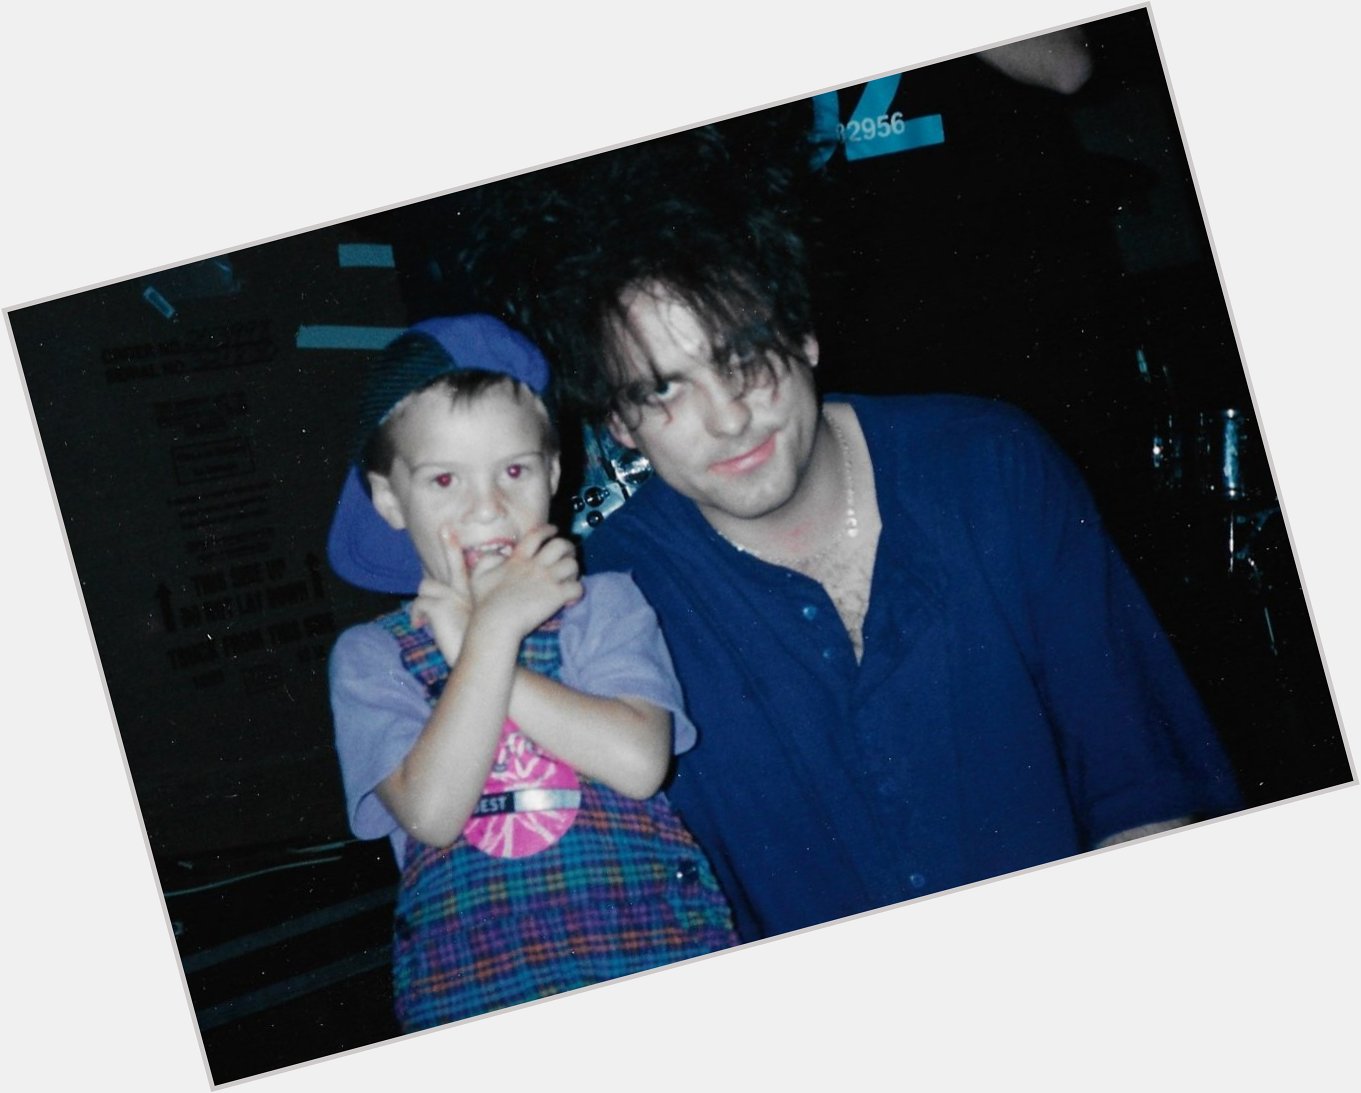 Cure-athon day! Happy birthday, Robert Smith. This is from Wish Tour 1992, my son with Robert Smith. 